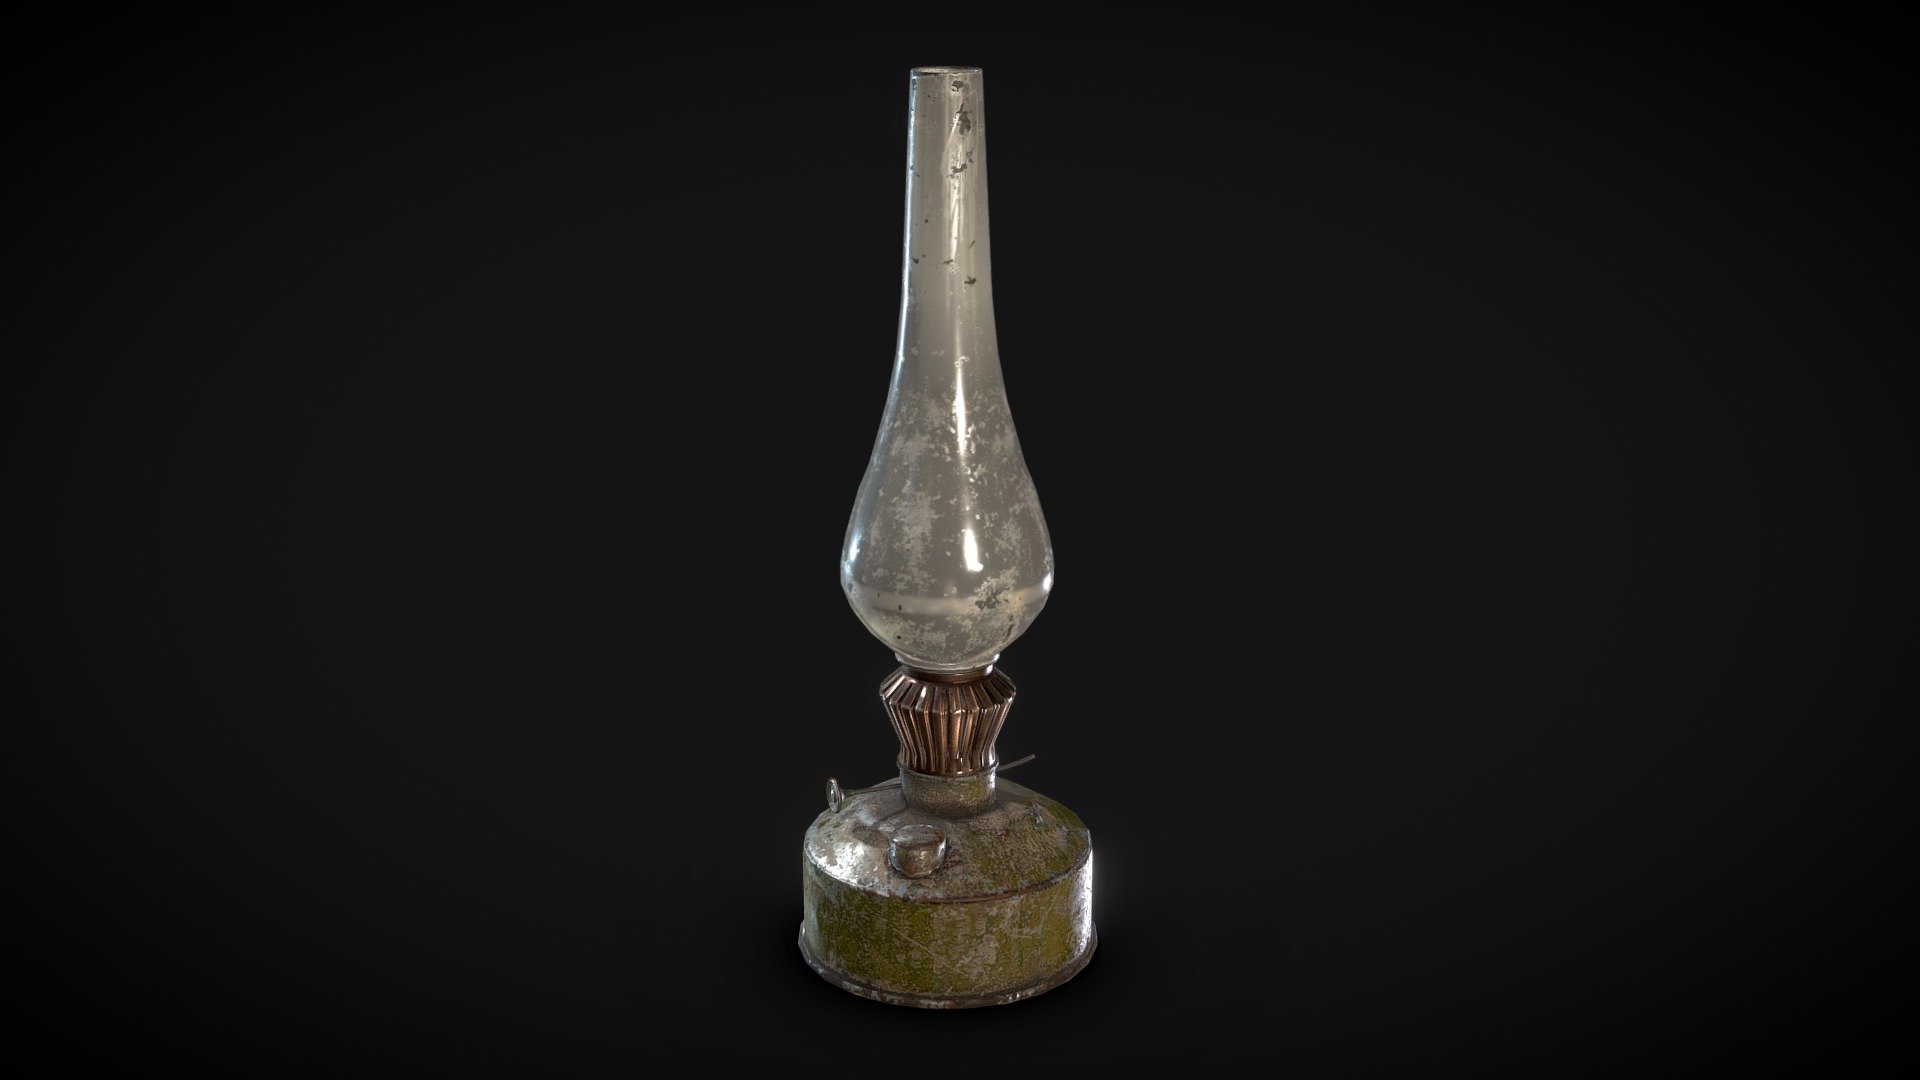 Optimized version of a vintage kerosene lamp, all rusty and derelict.
Made in Blender, Textured in Substance Painter, with HD Textures :]
Complete game-ready asset, perfect for games and projects! - Rusty Kerosene Lamp - Download Free 3D model by GameDev Nick (@GameDevNick) 3d model